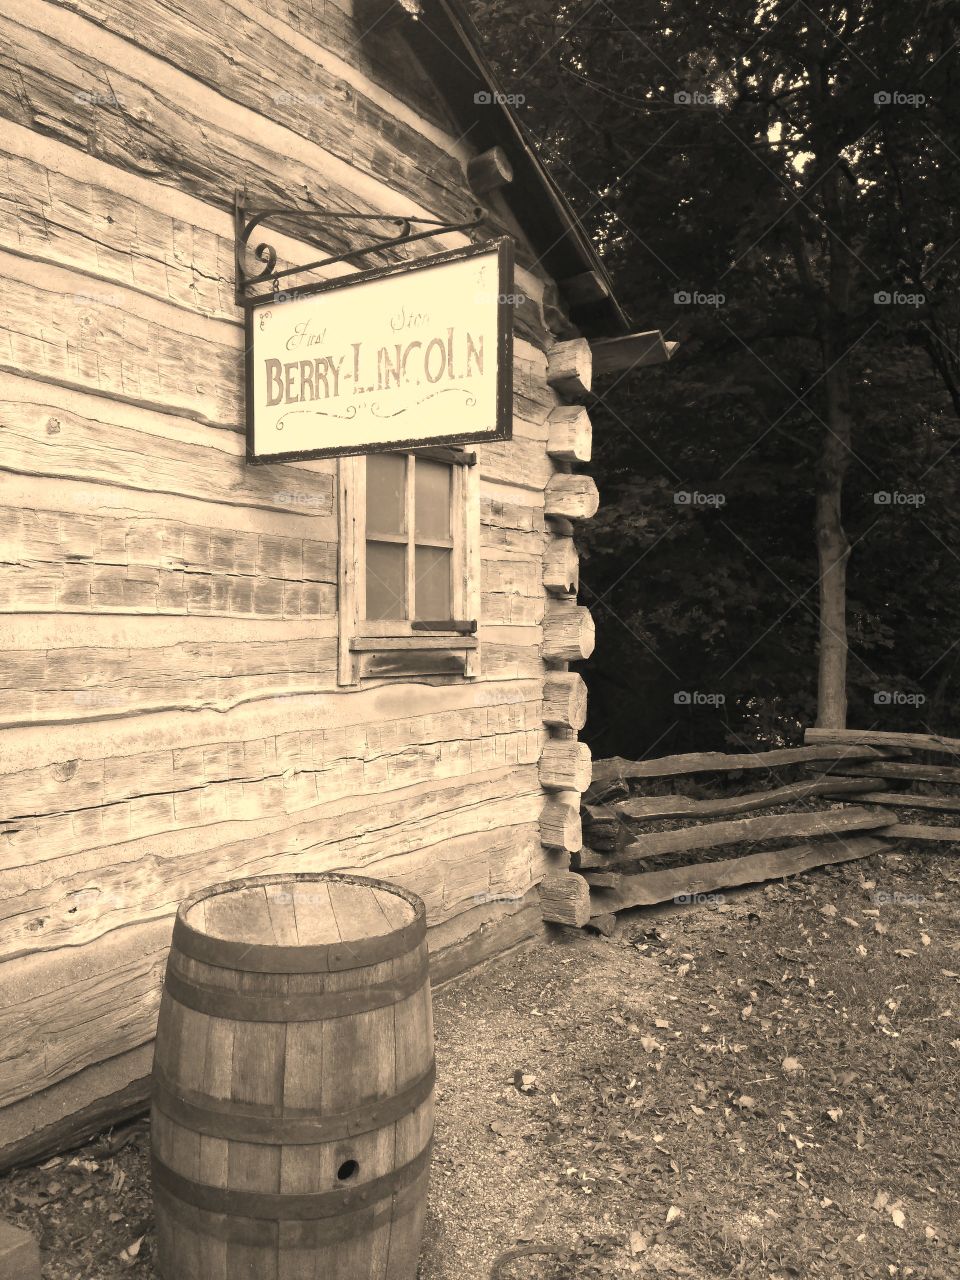 Lincoln's store